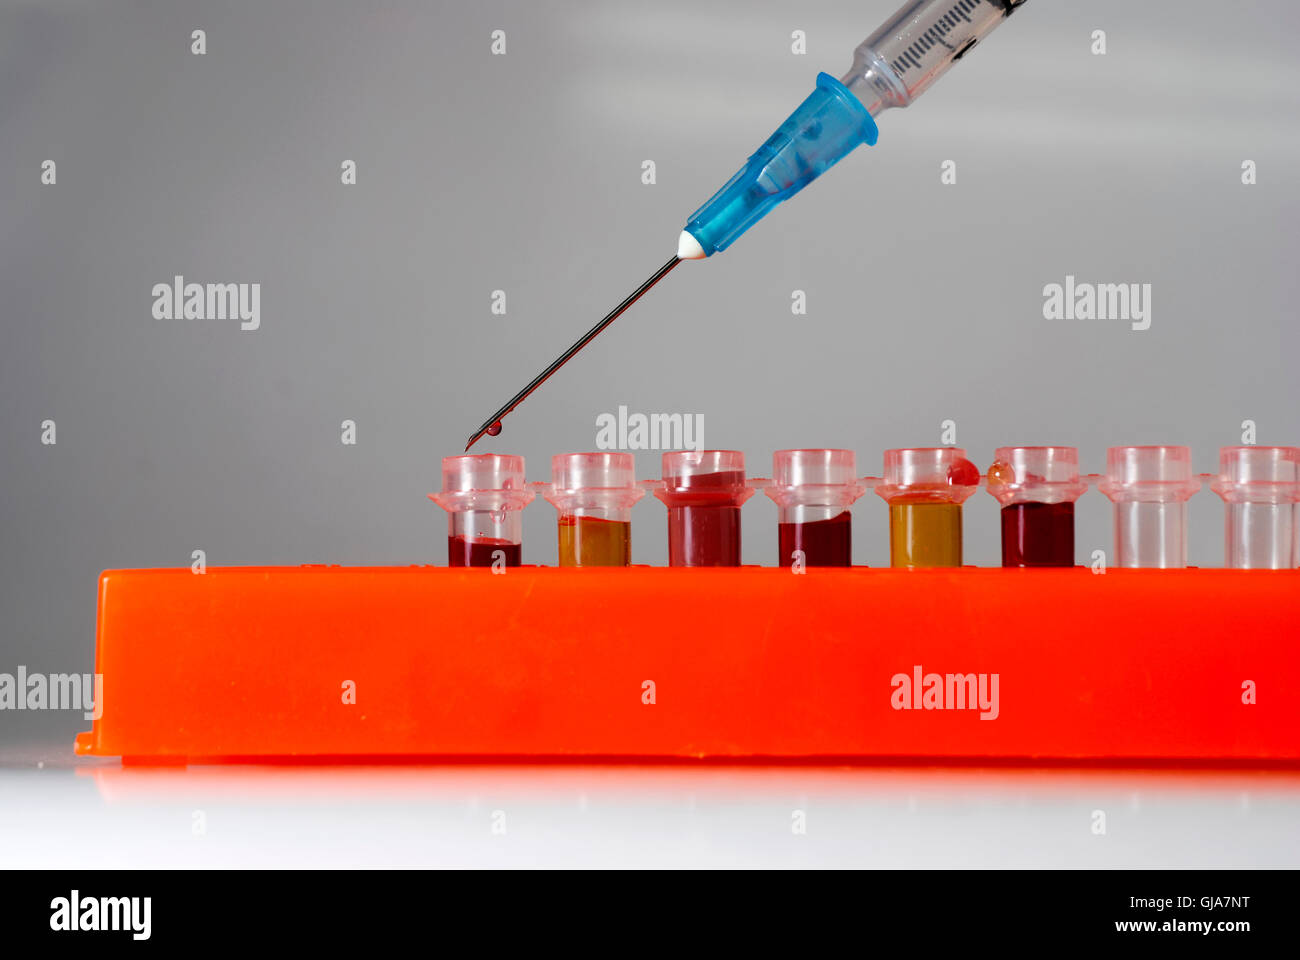 DNA research with graphics charts reference in the background Stock Photo